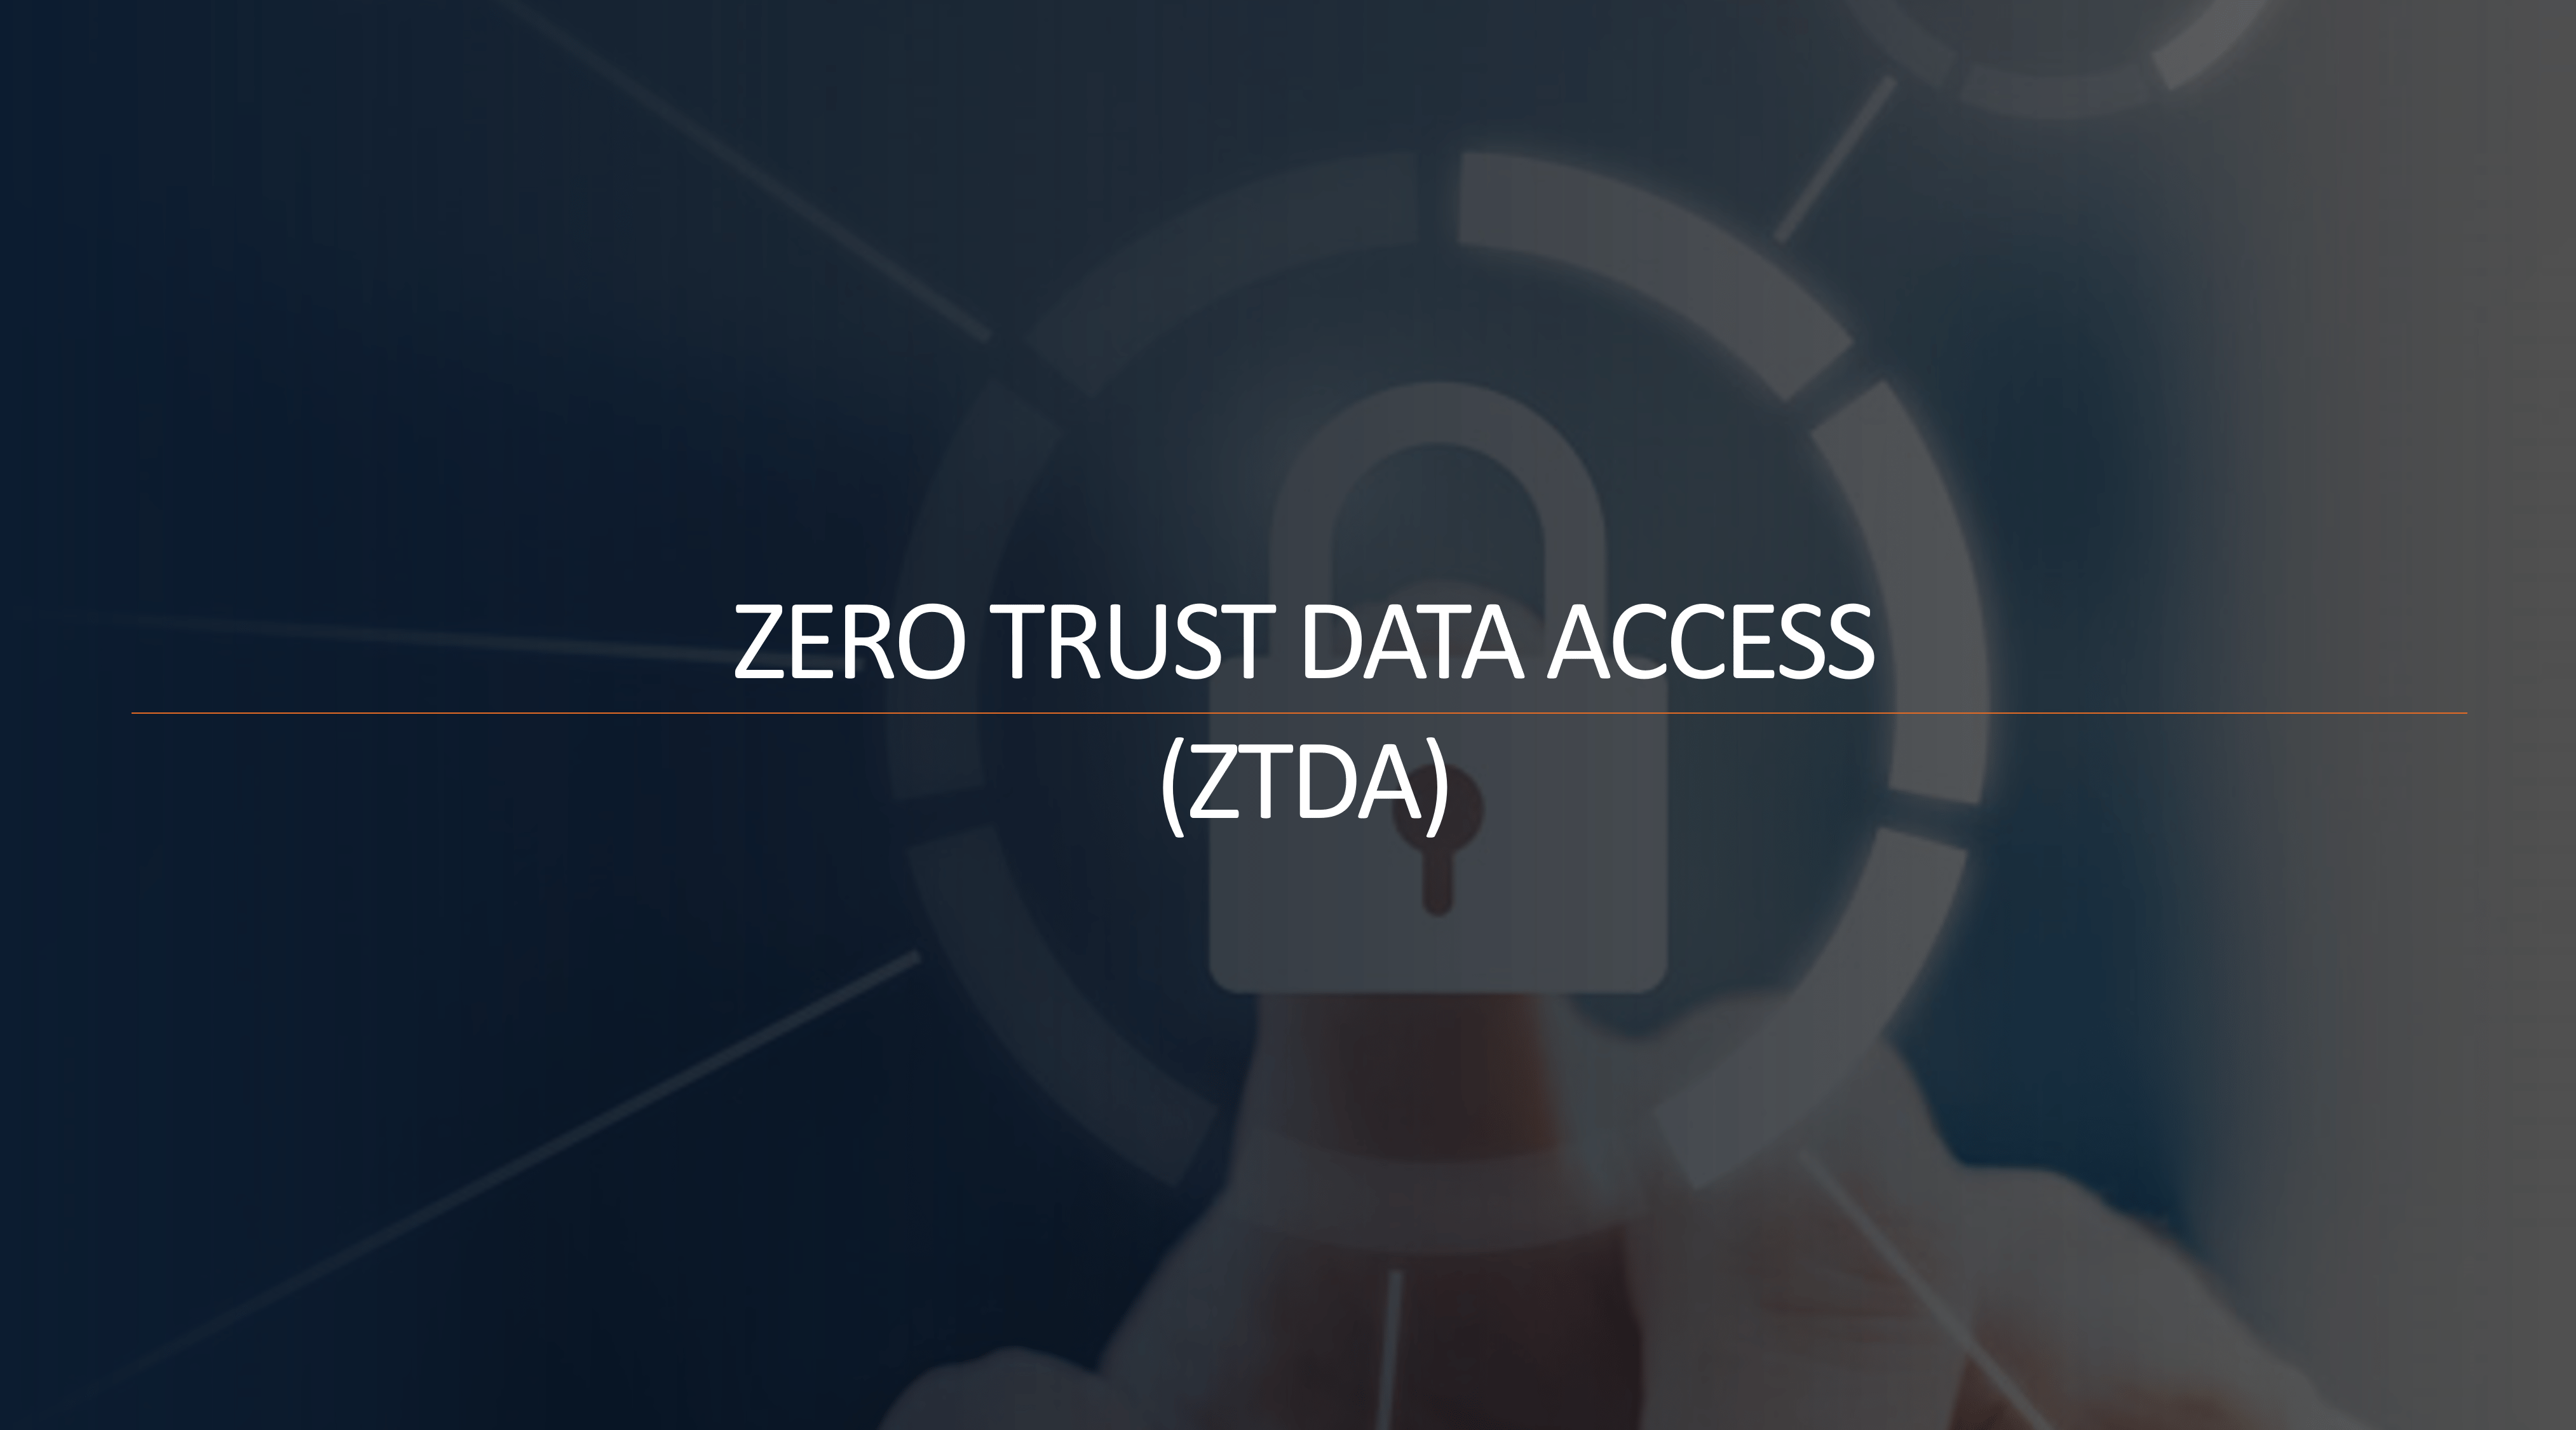 How to Protect Your Data with Zero Trust Data Access (ZTDA)